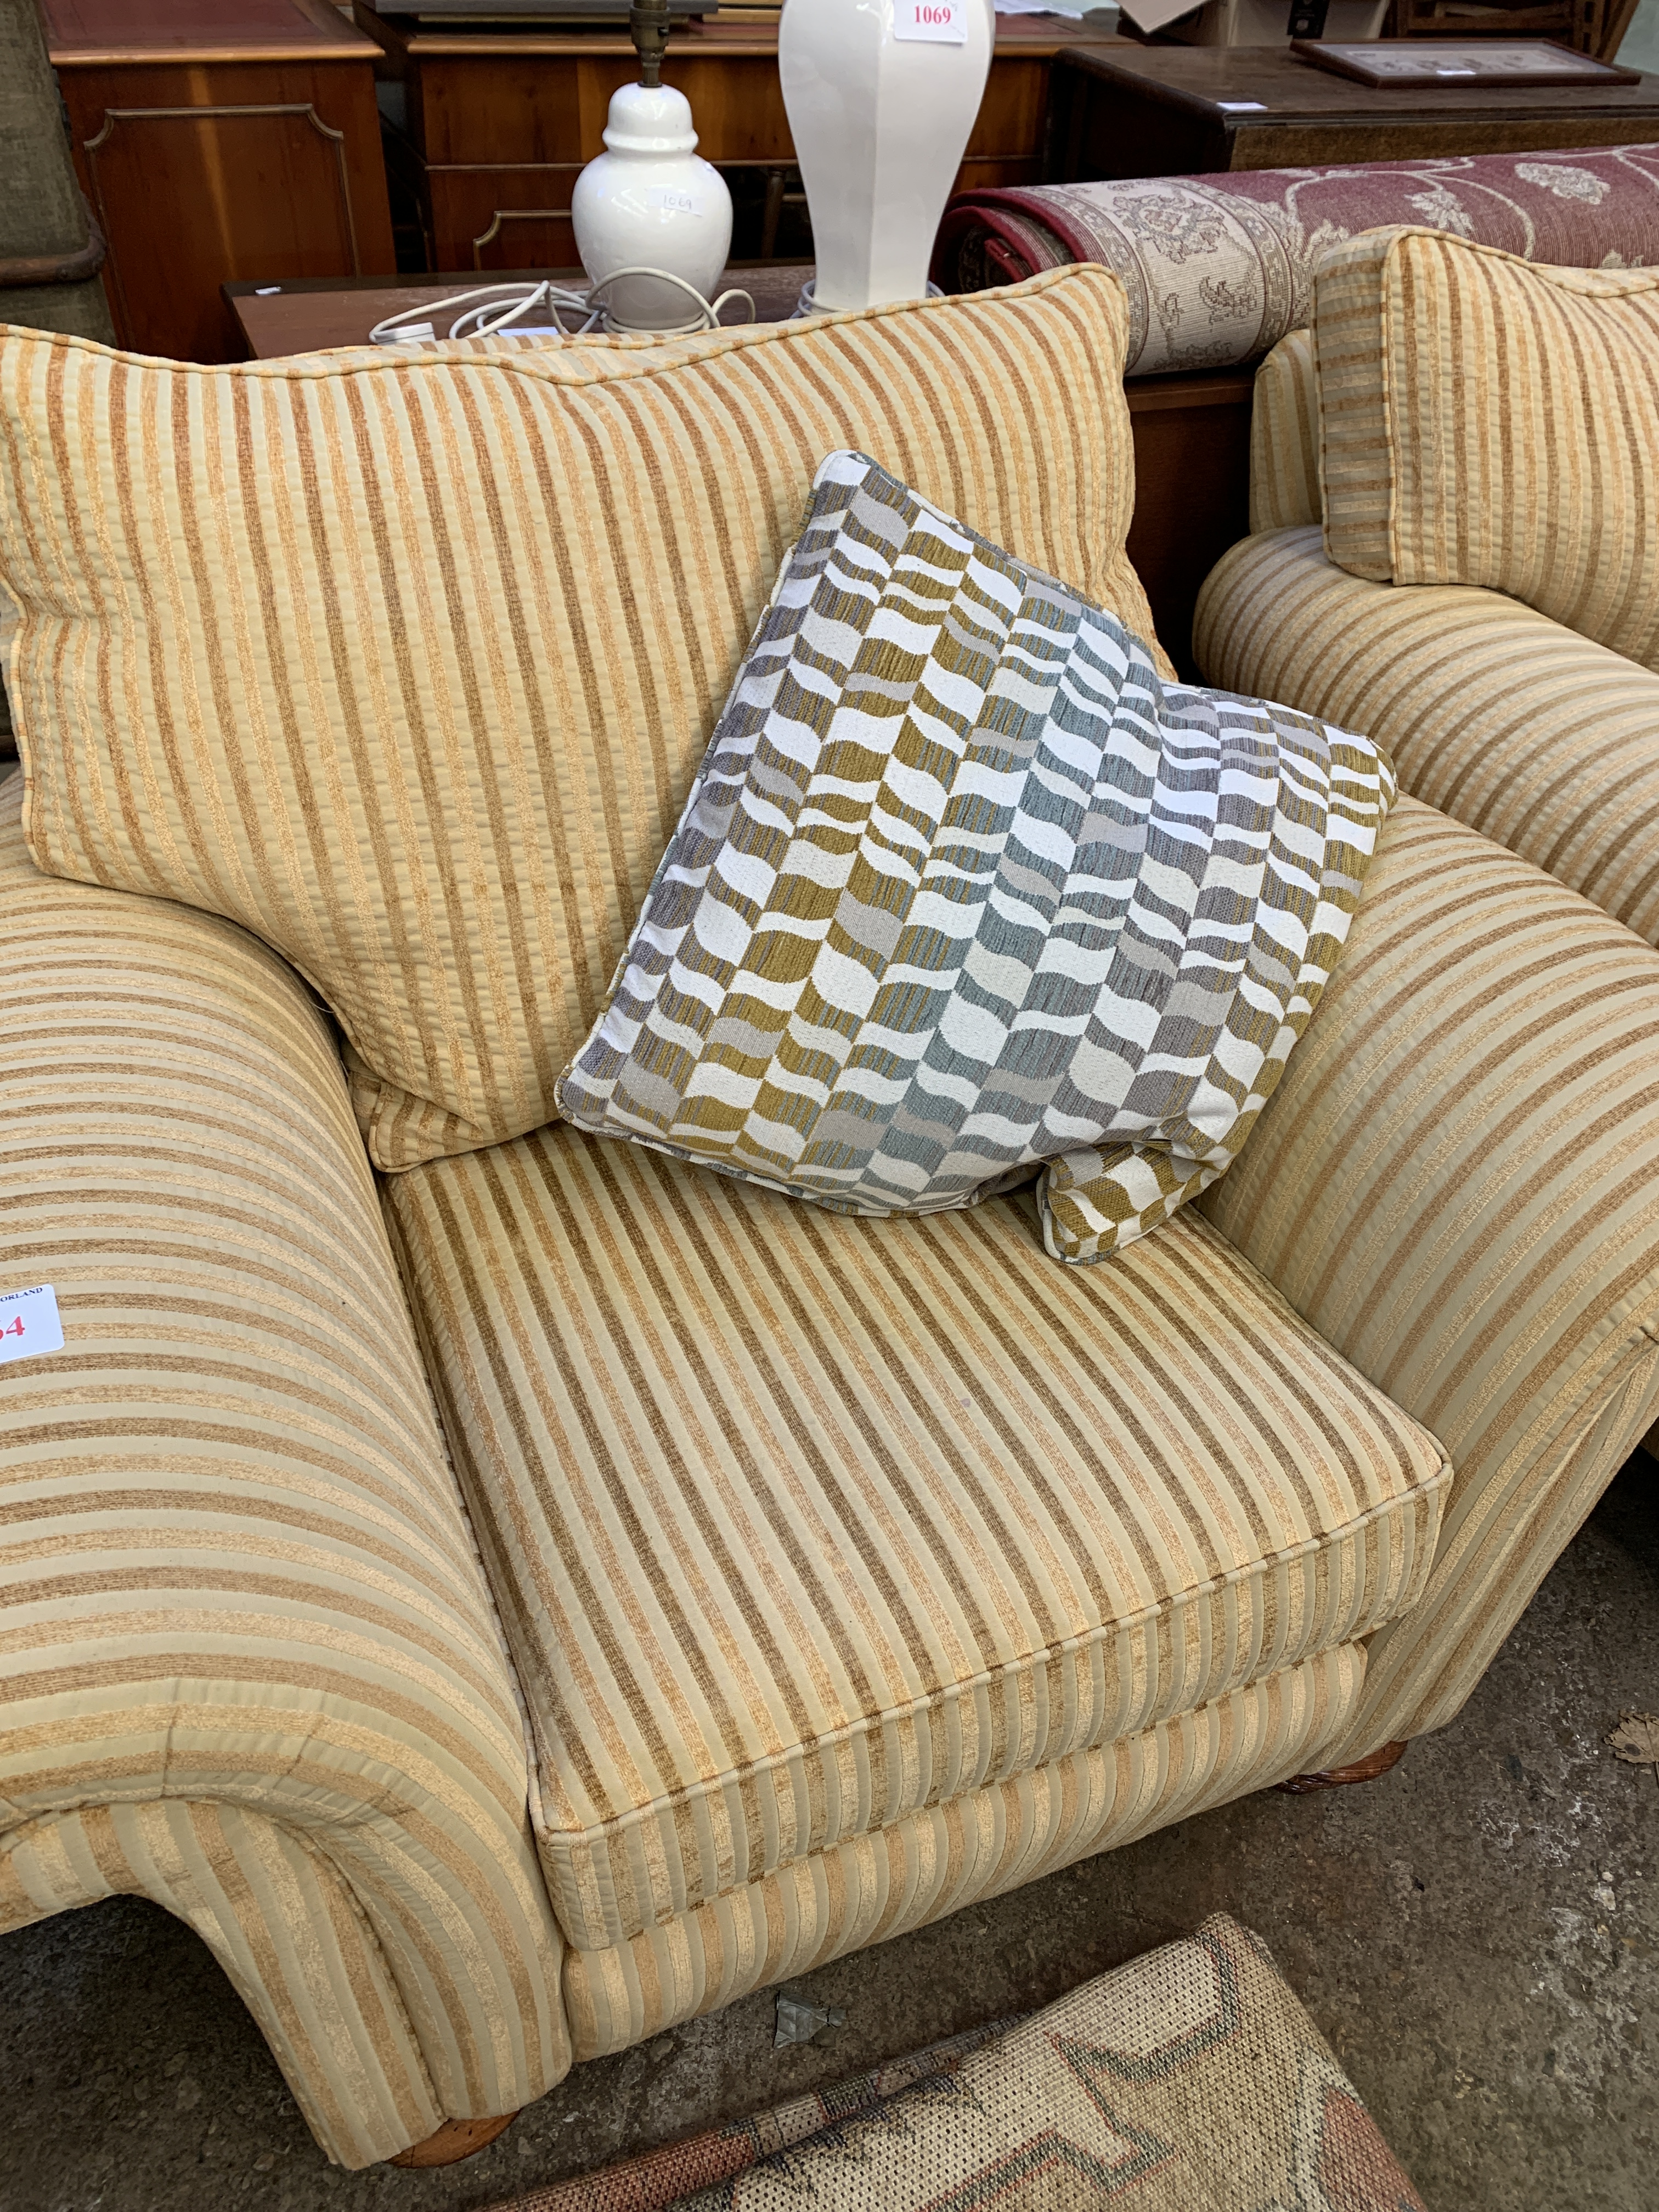 Two armchairs upholstered in gold coloured striped fabric